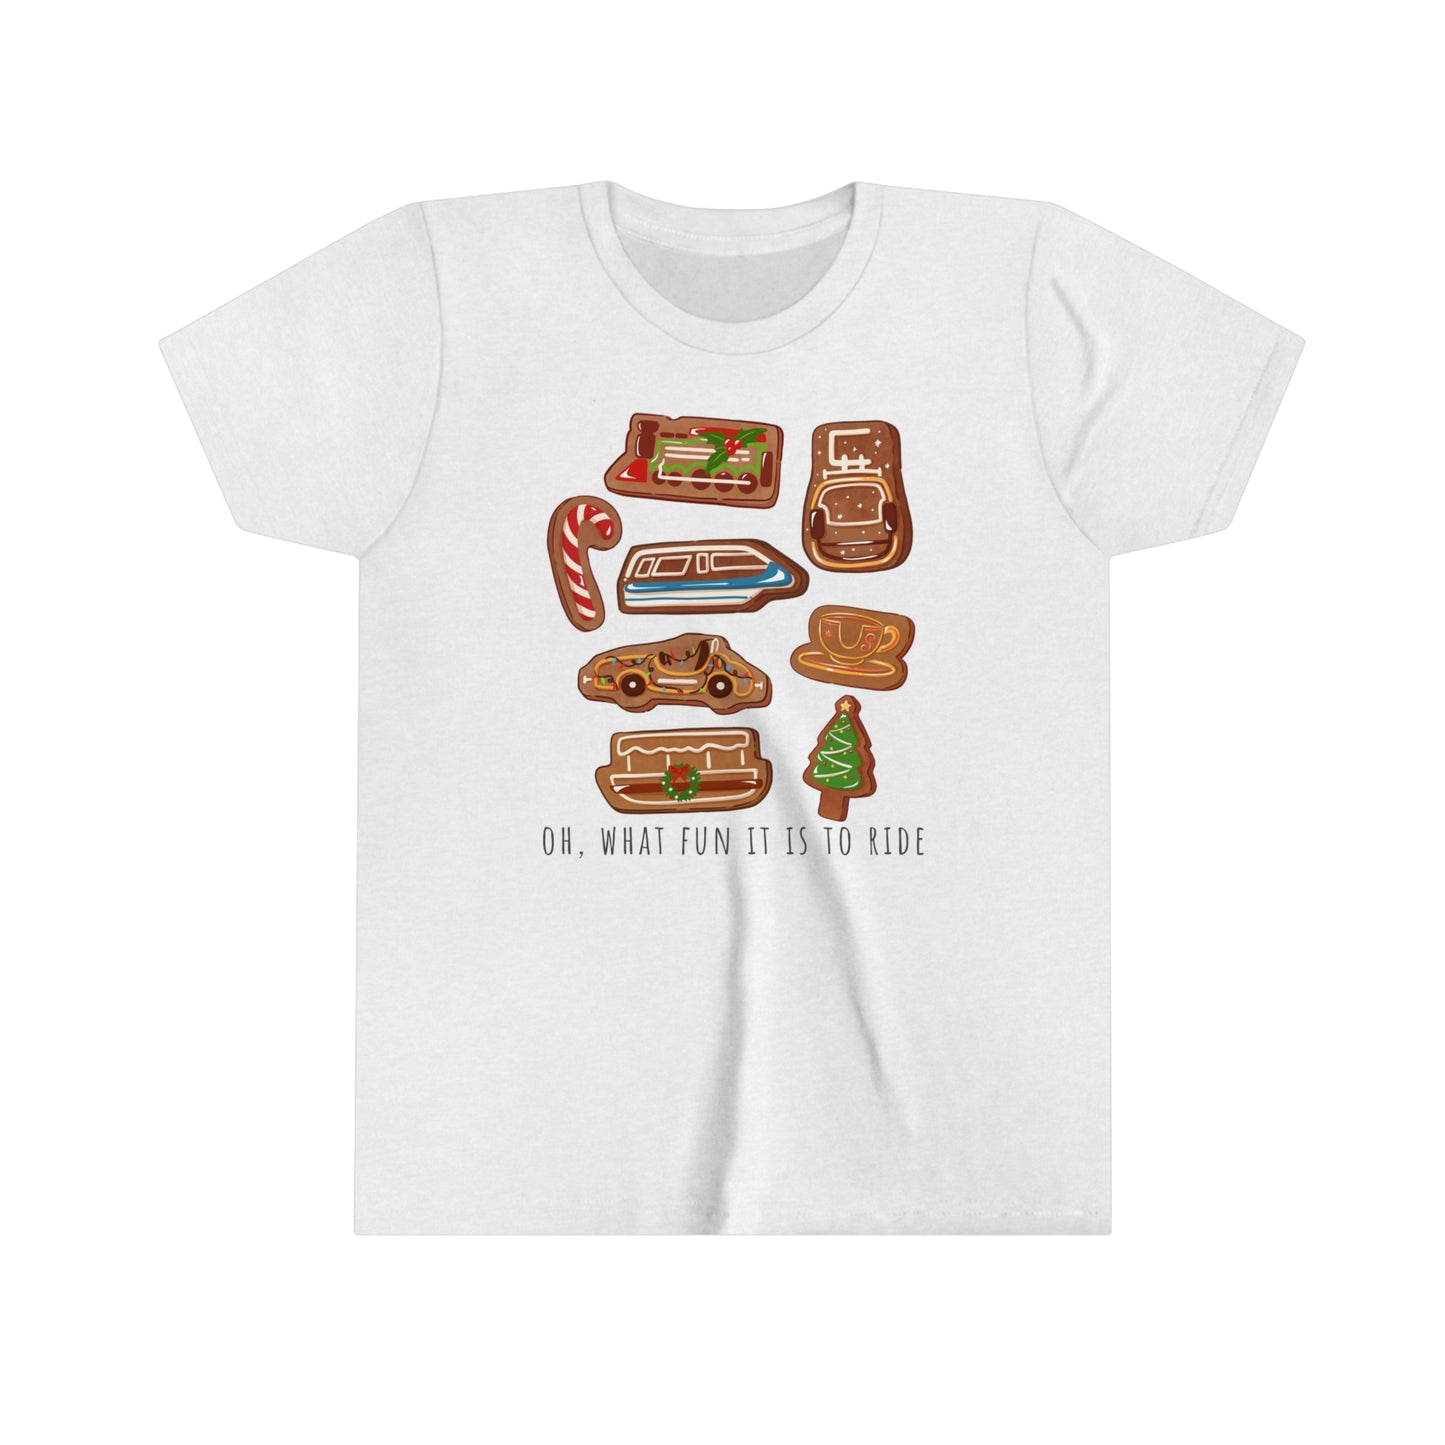 Oh What Fun it is to Ride Youth Short Sleeve Tee Shirt